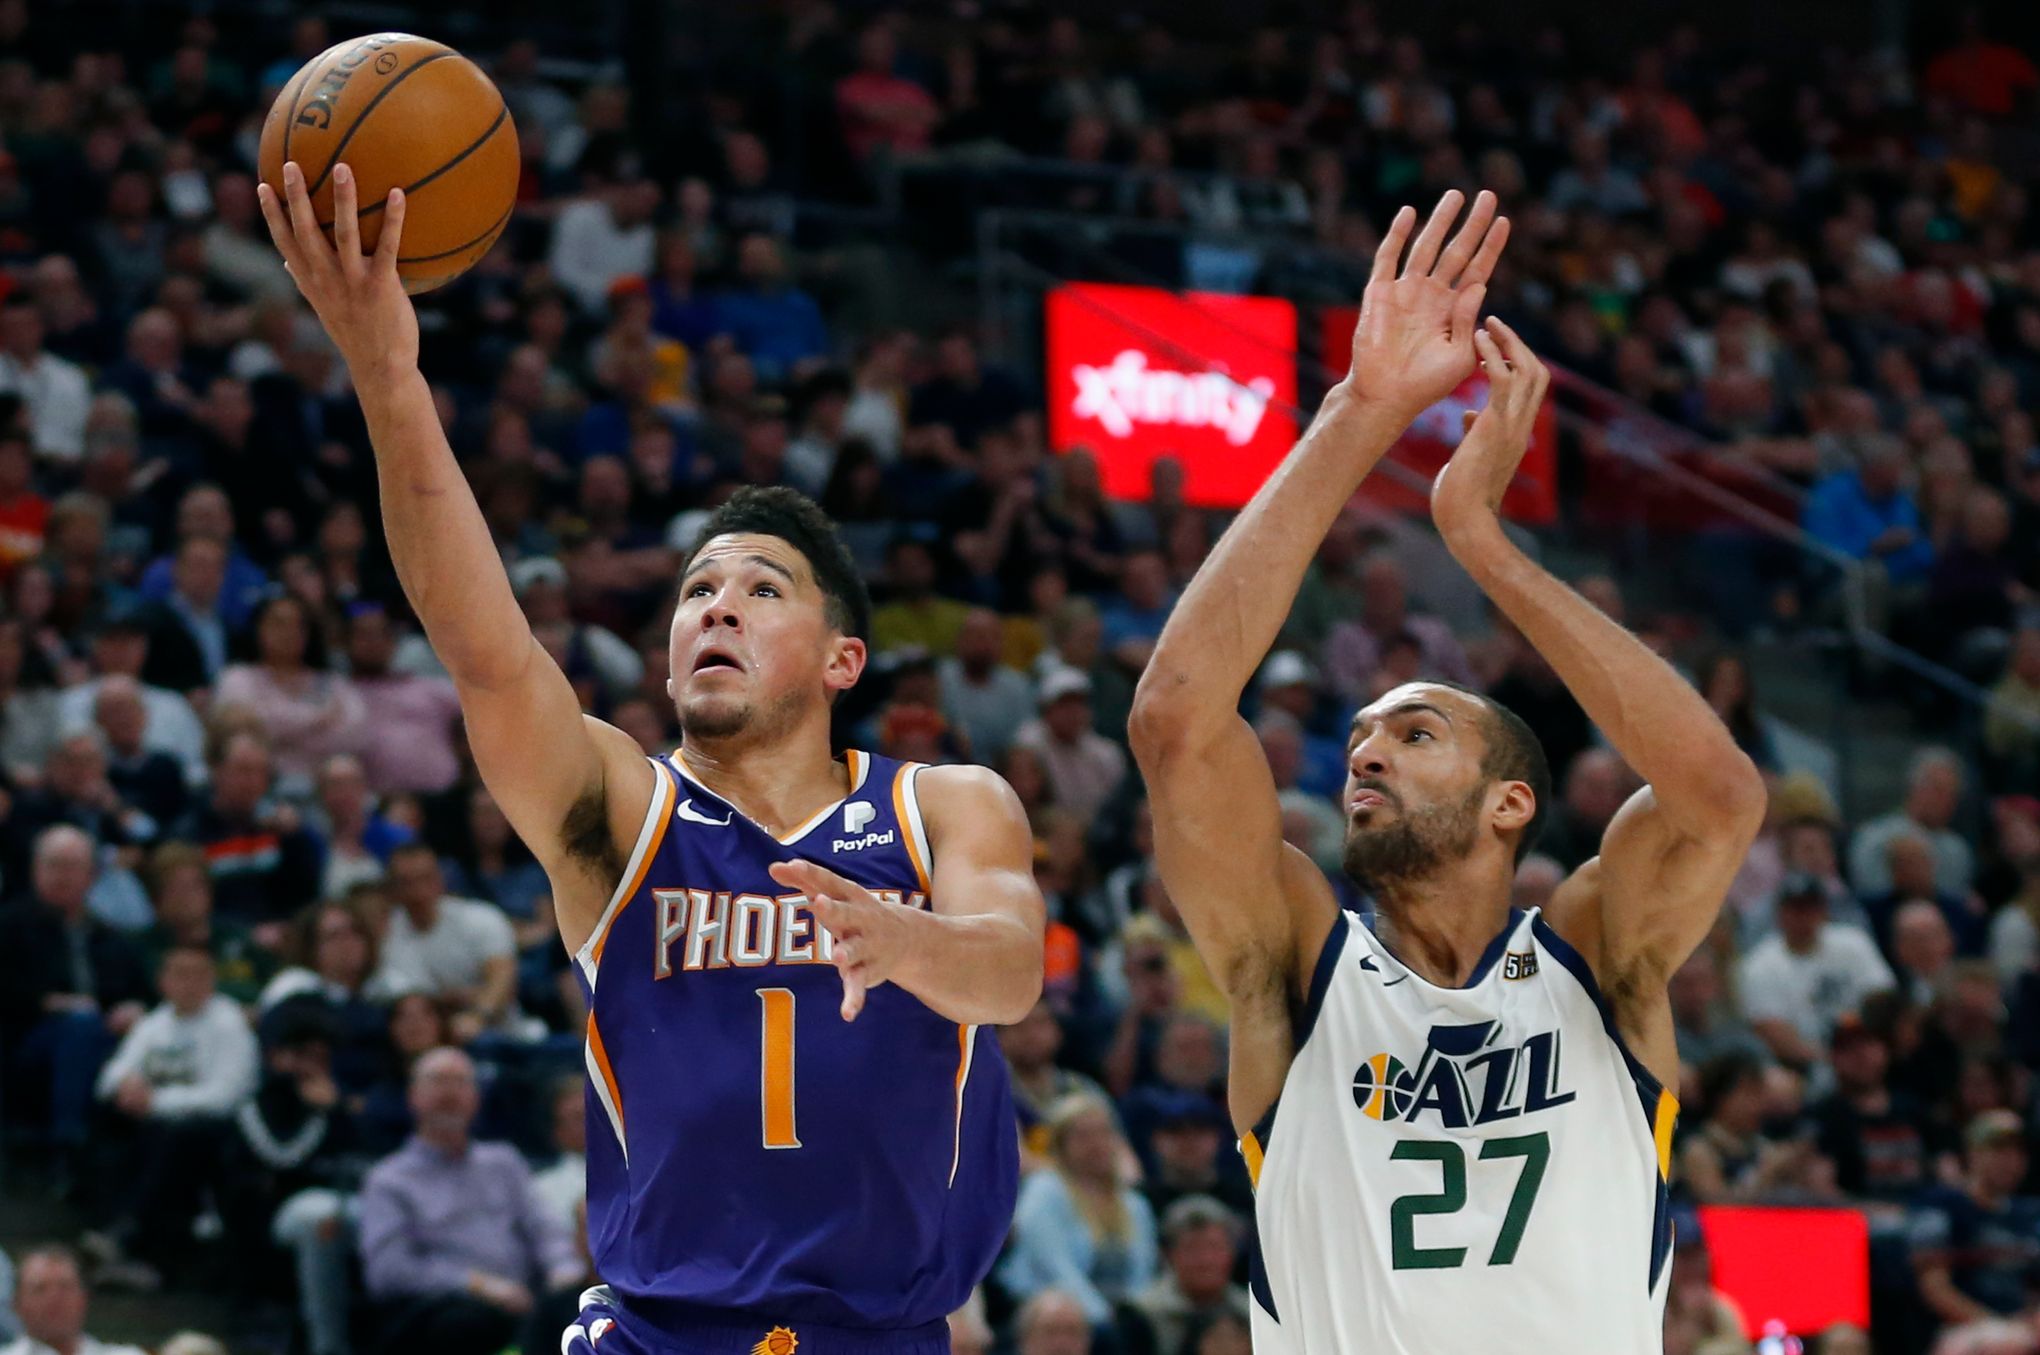 Rudy Gobert Sets New Career-High For Most Dunks In Single Game